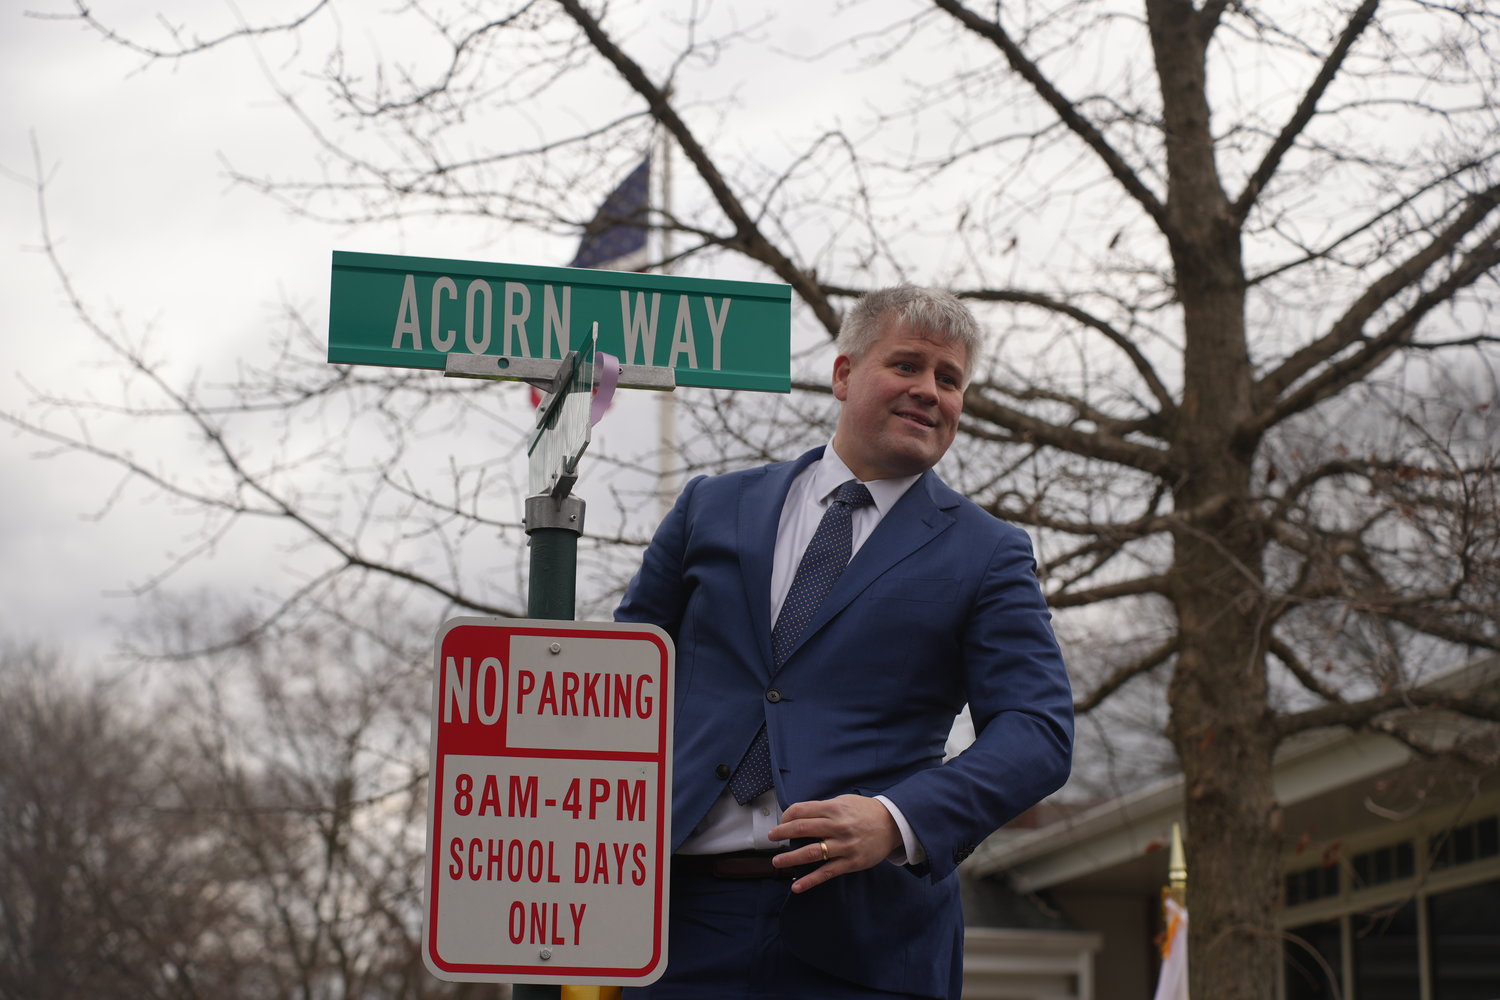 Malverne Mayor Keith Corbett revealed the new name of the street during the ceremony.